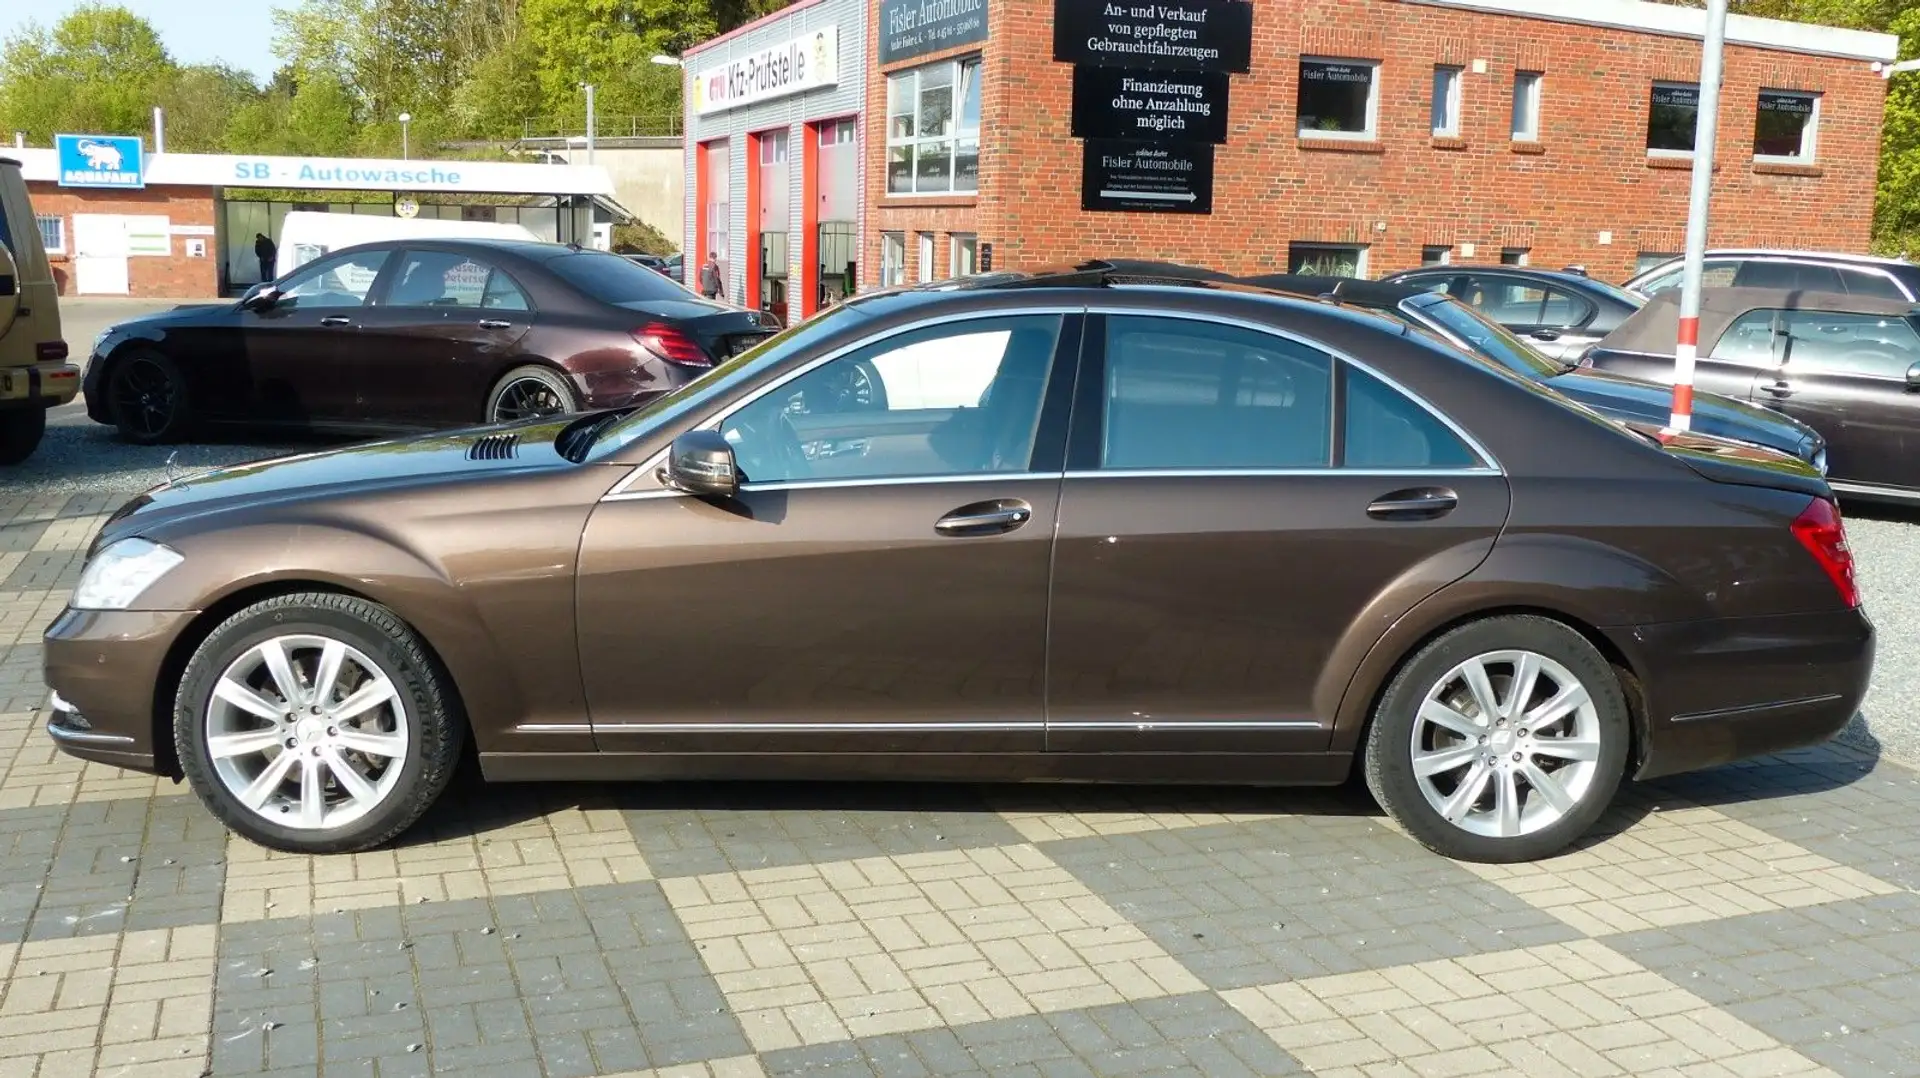 Mercedes-Benz S 450 4Matic tolle Farbkombi SHD Standhzg Brown - 2